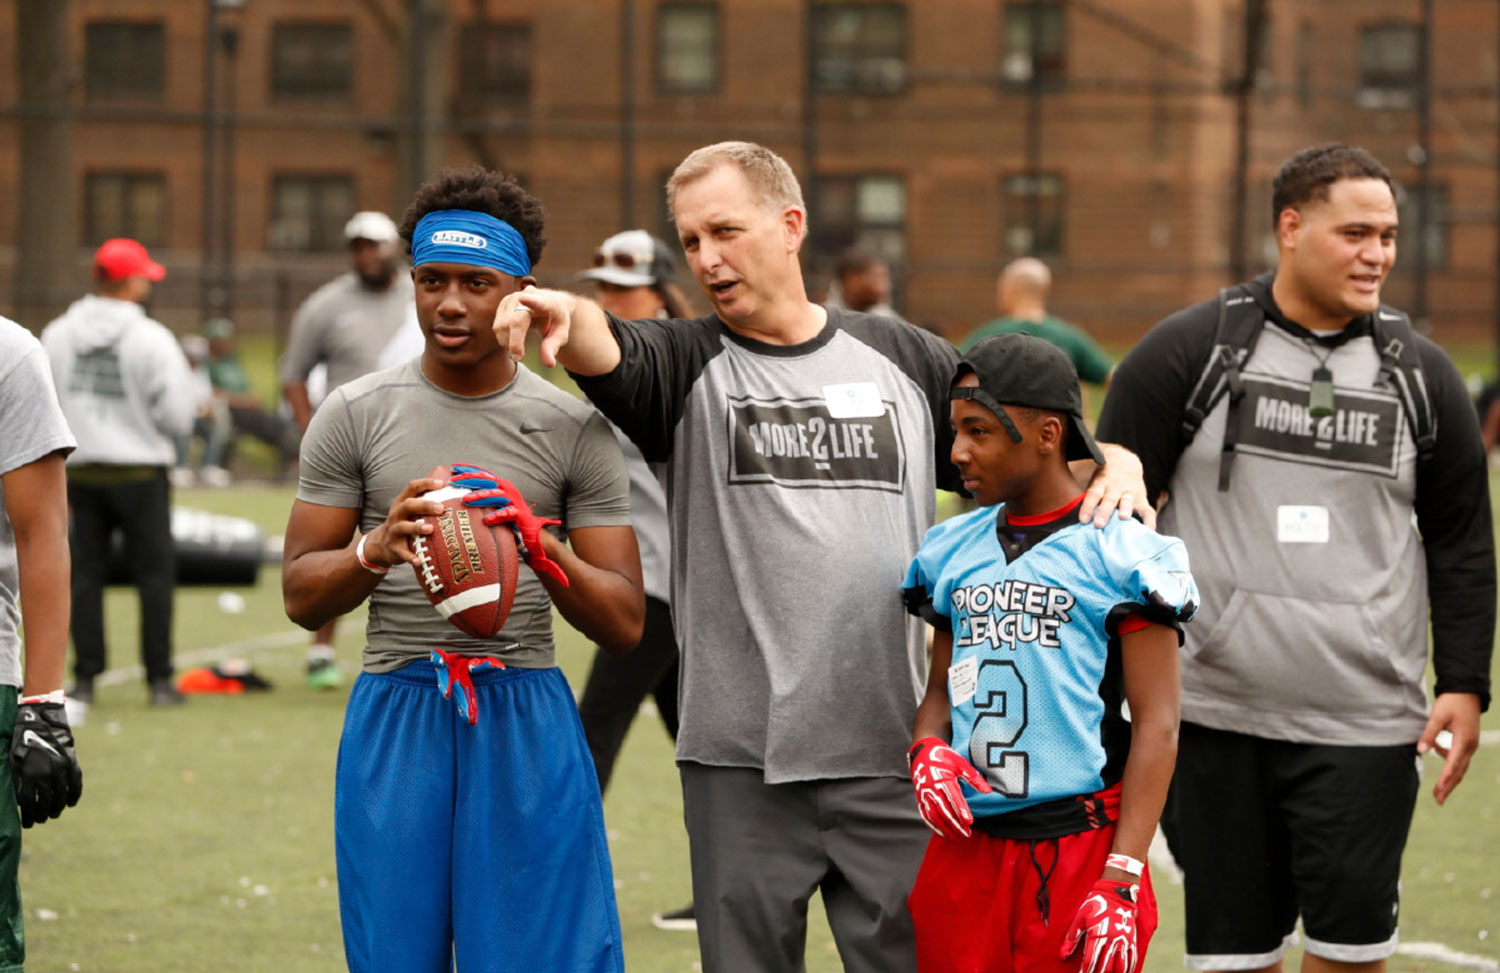 BYU coach Ty Detmer works with QBs at the camp.